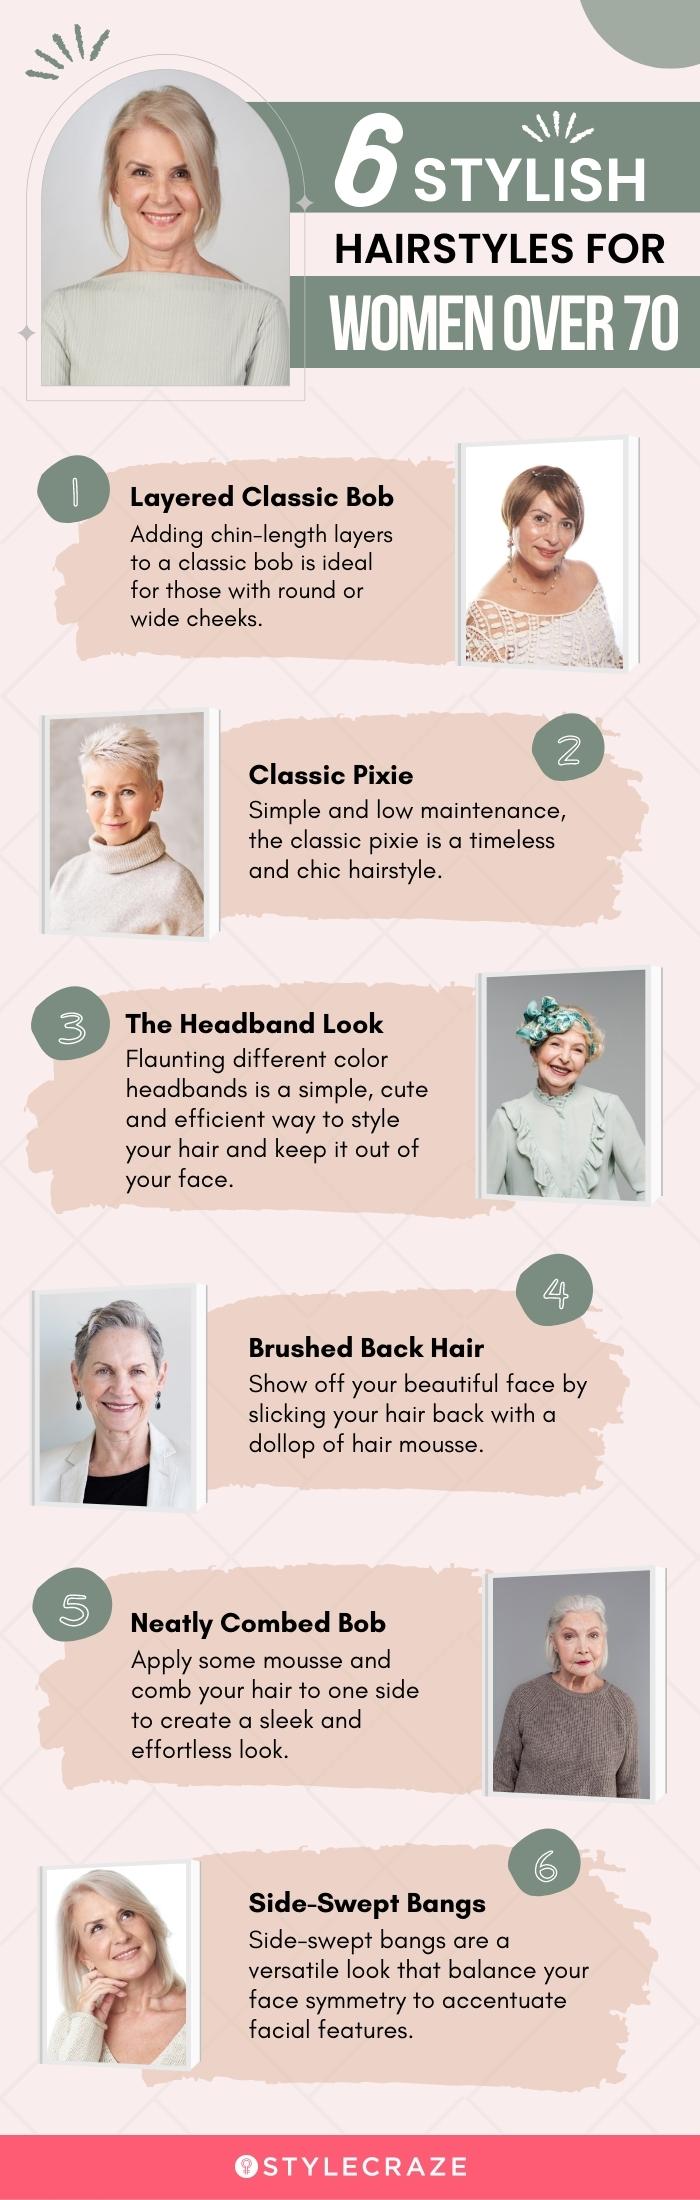 6 stylish hairstyles for women over 70 (infographic)